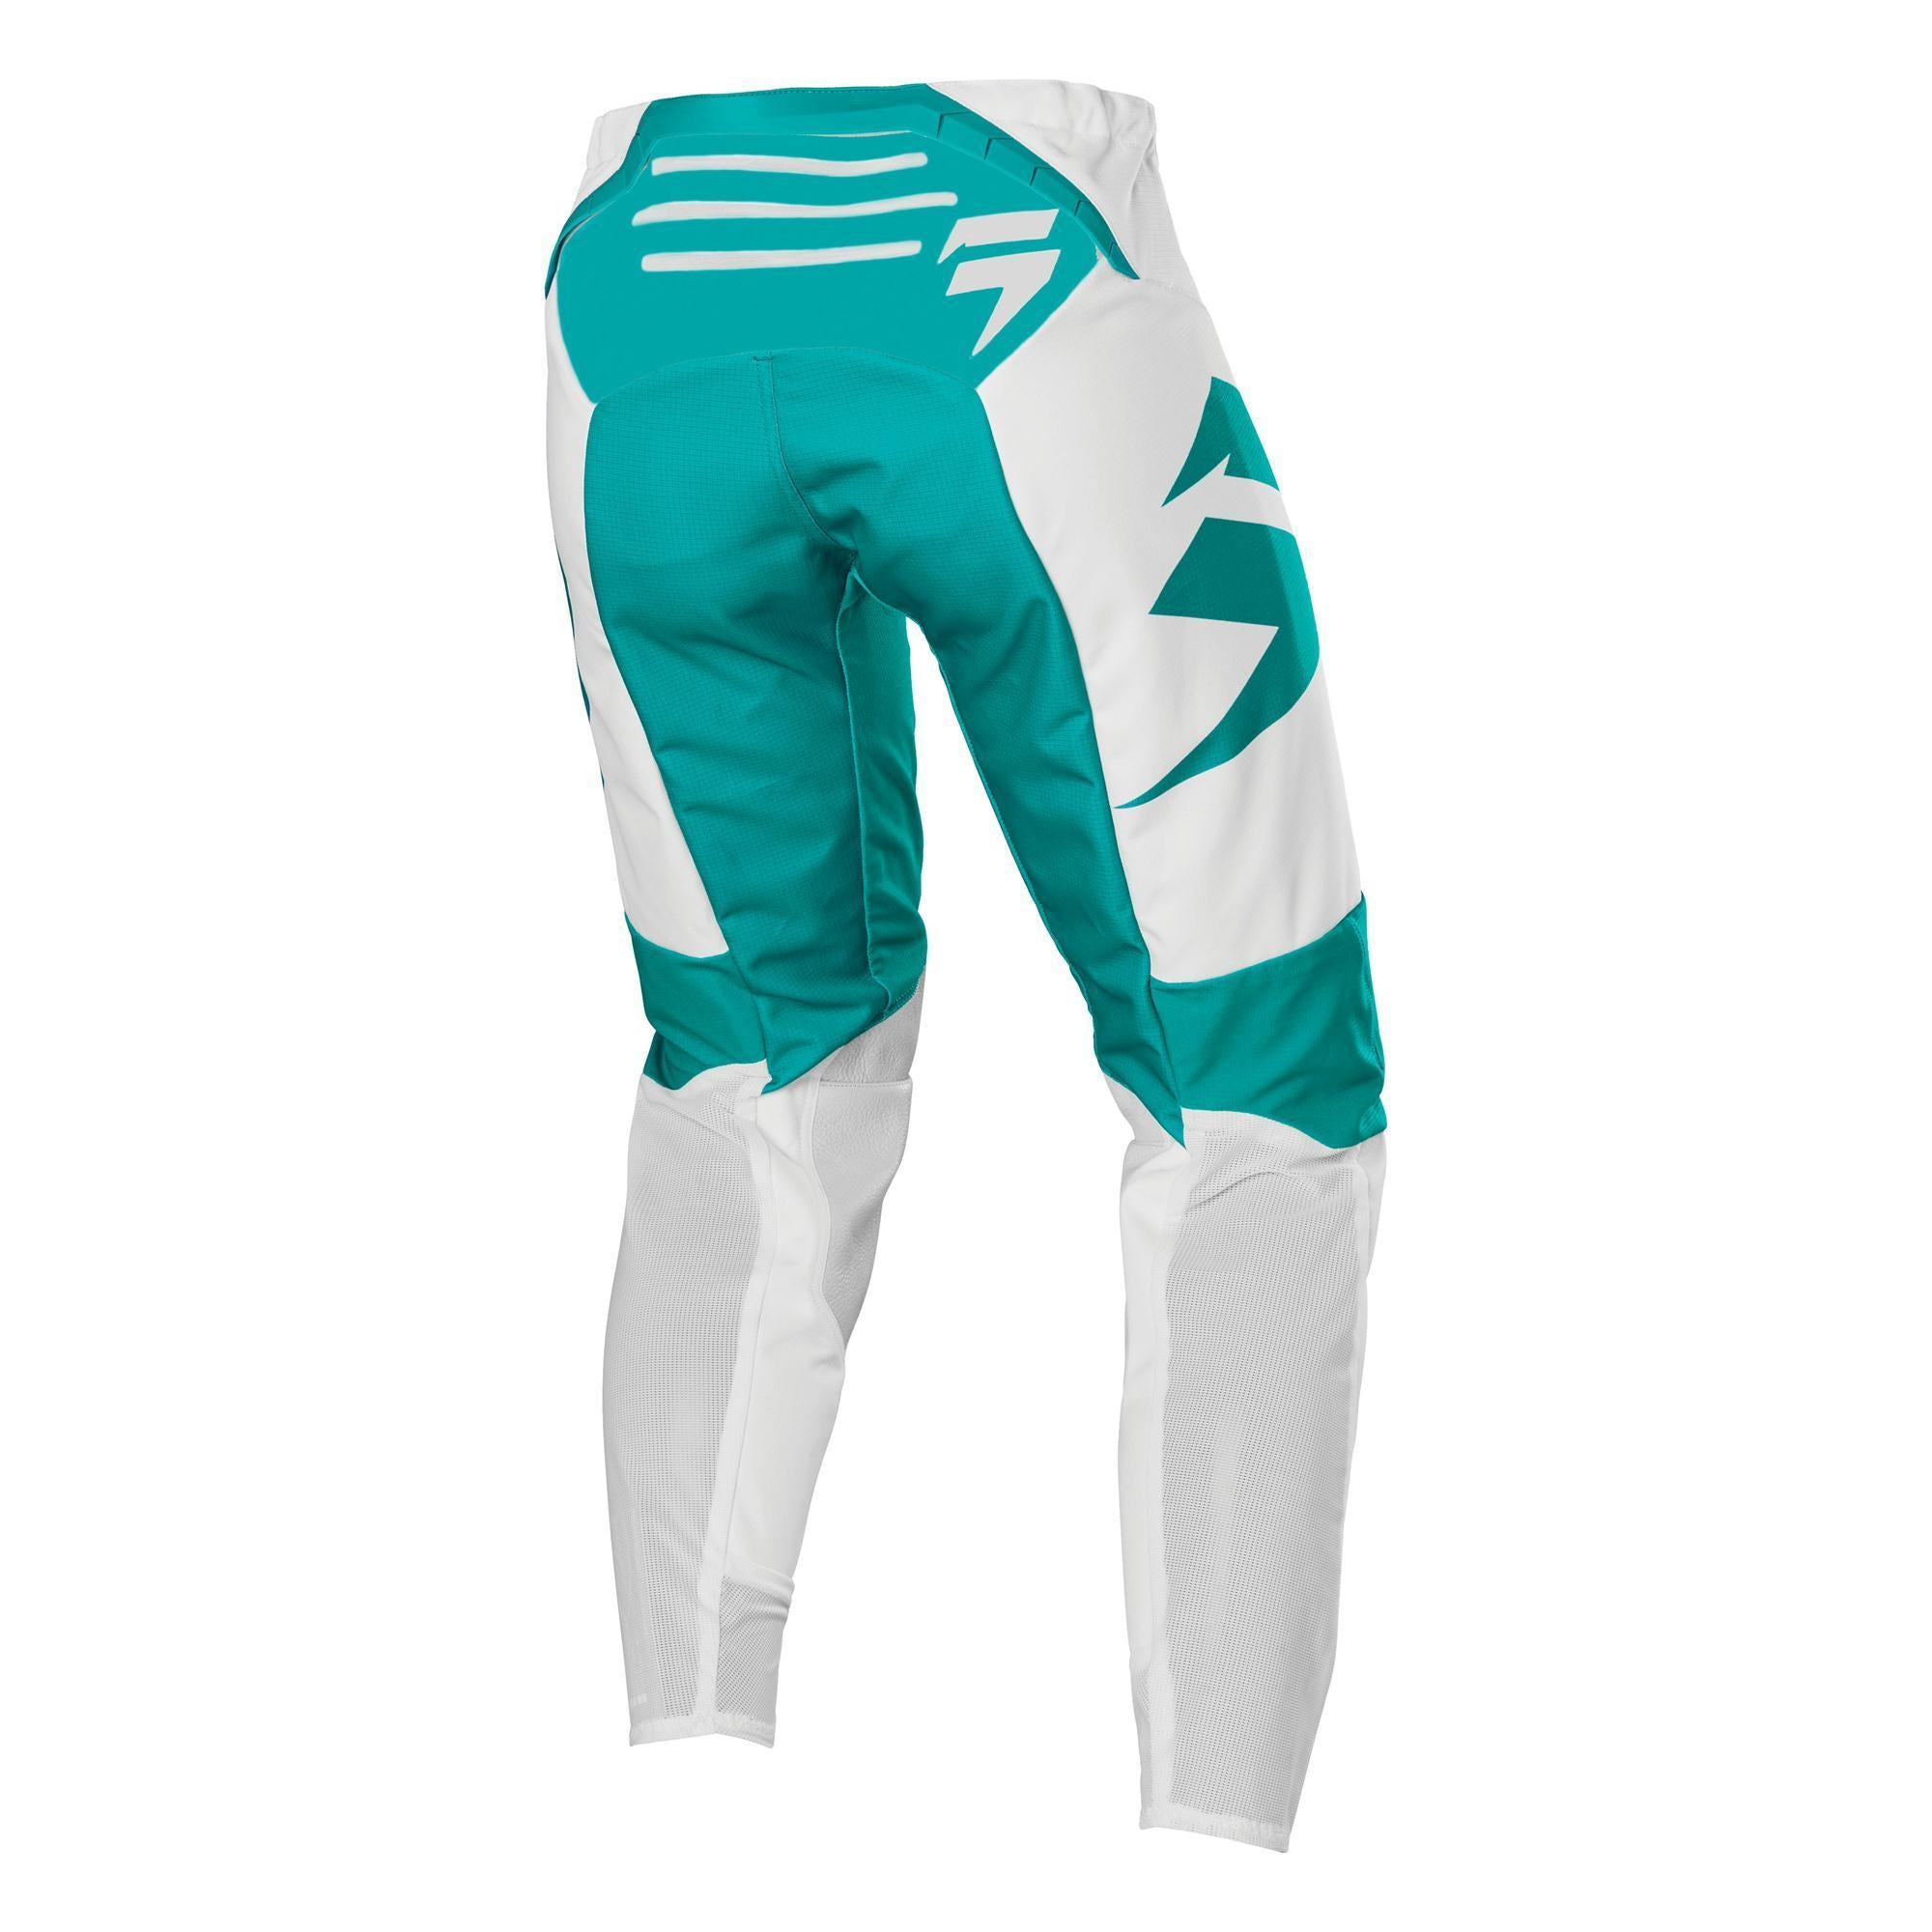 3Lack Label Race Graphic 1 Pant - Fox Racing South Africa